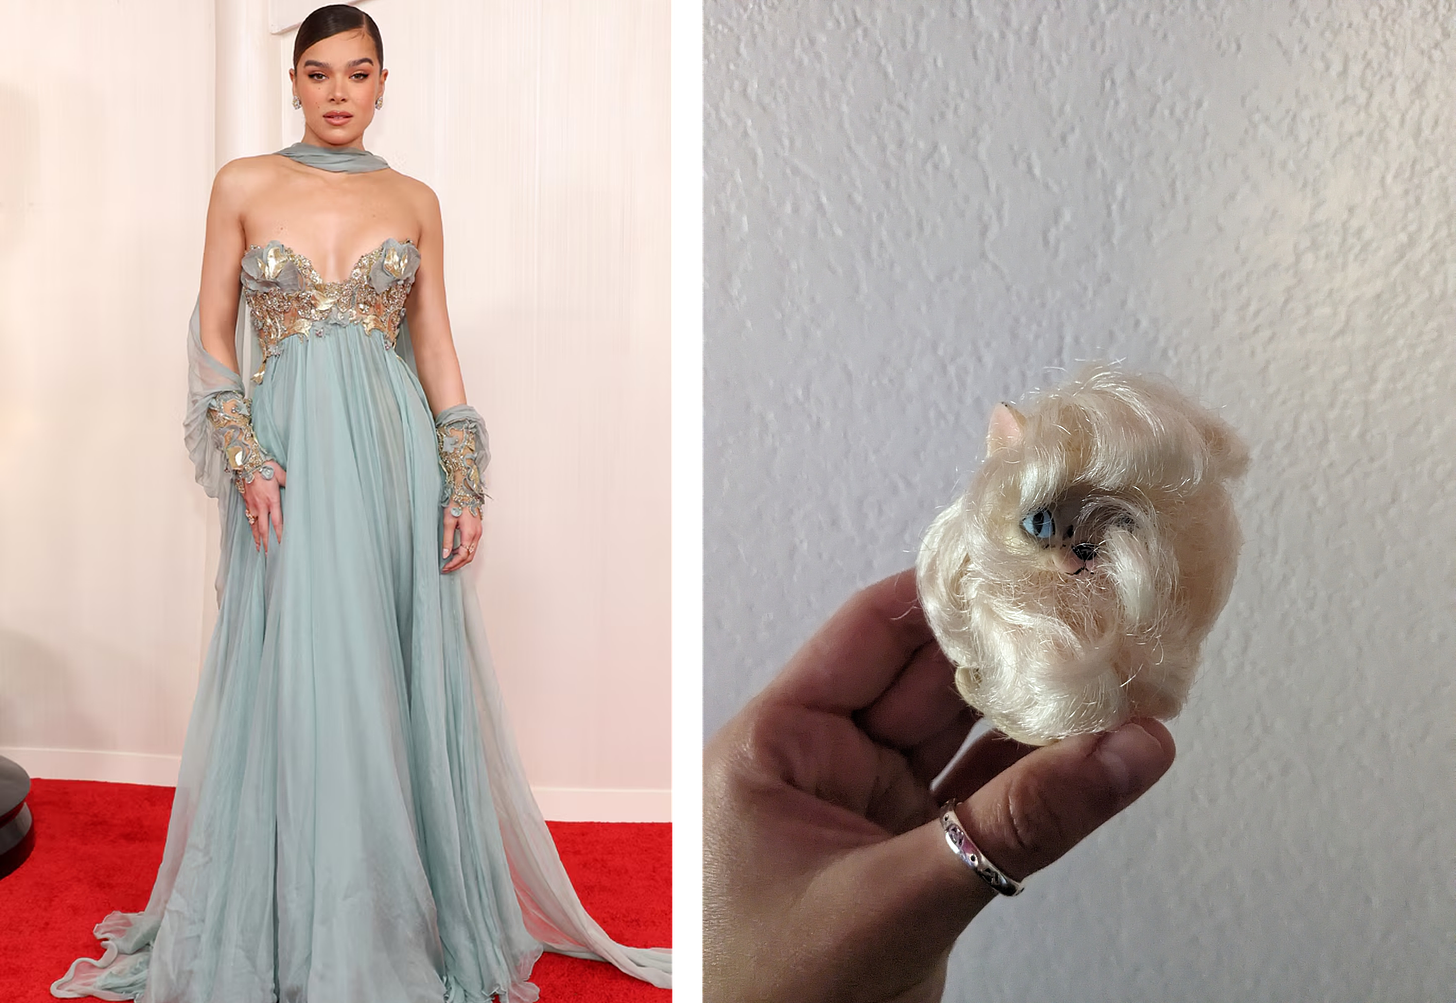 Left: Hailee Steinfeld in a muted mint green gown with metallic accents and a cool cape-like thing draped from her neck to her wrists. Right: An unidentified creature covered in blond hair.